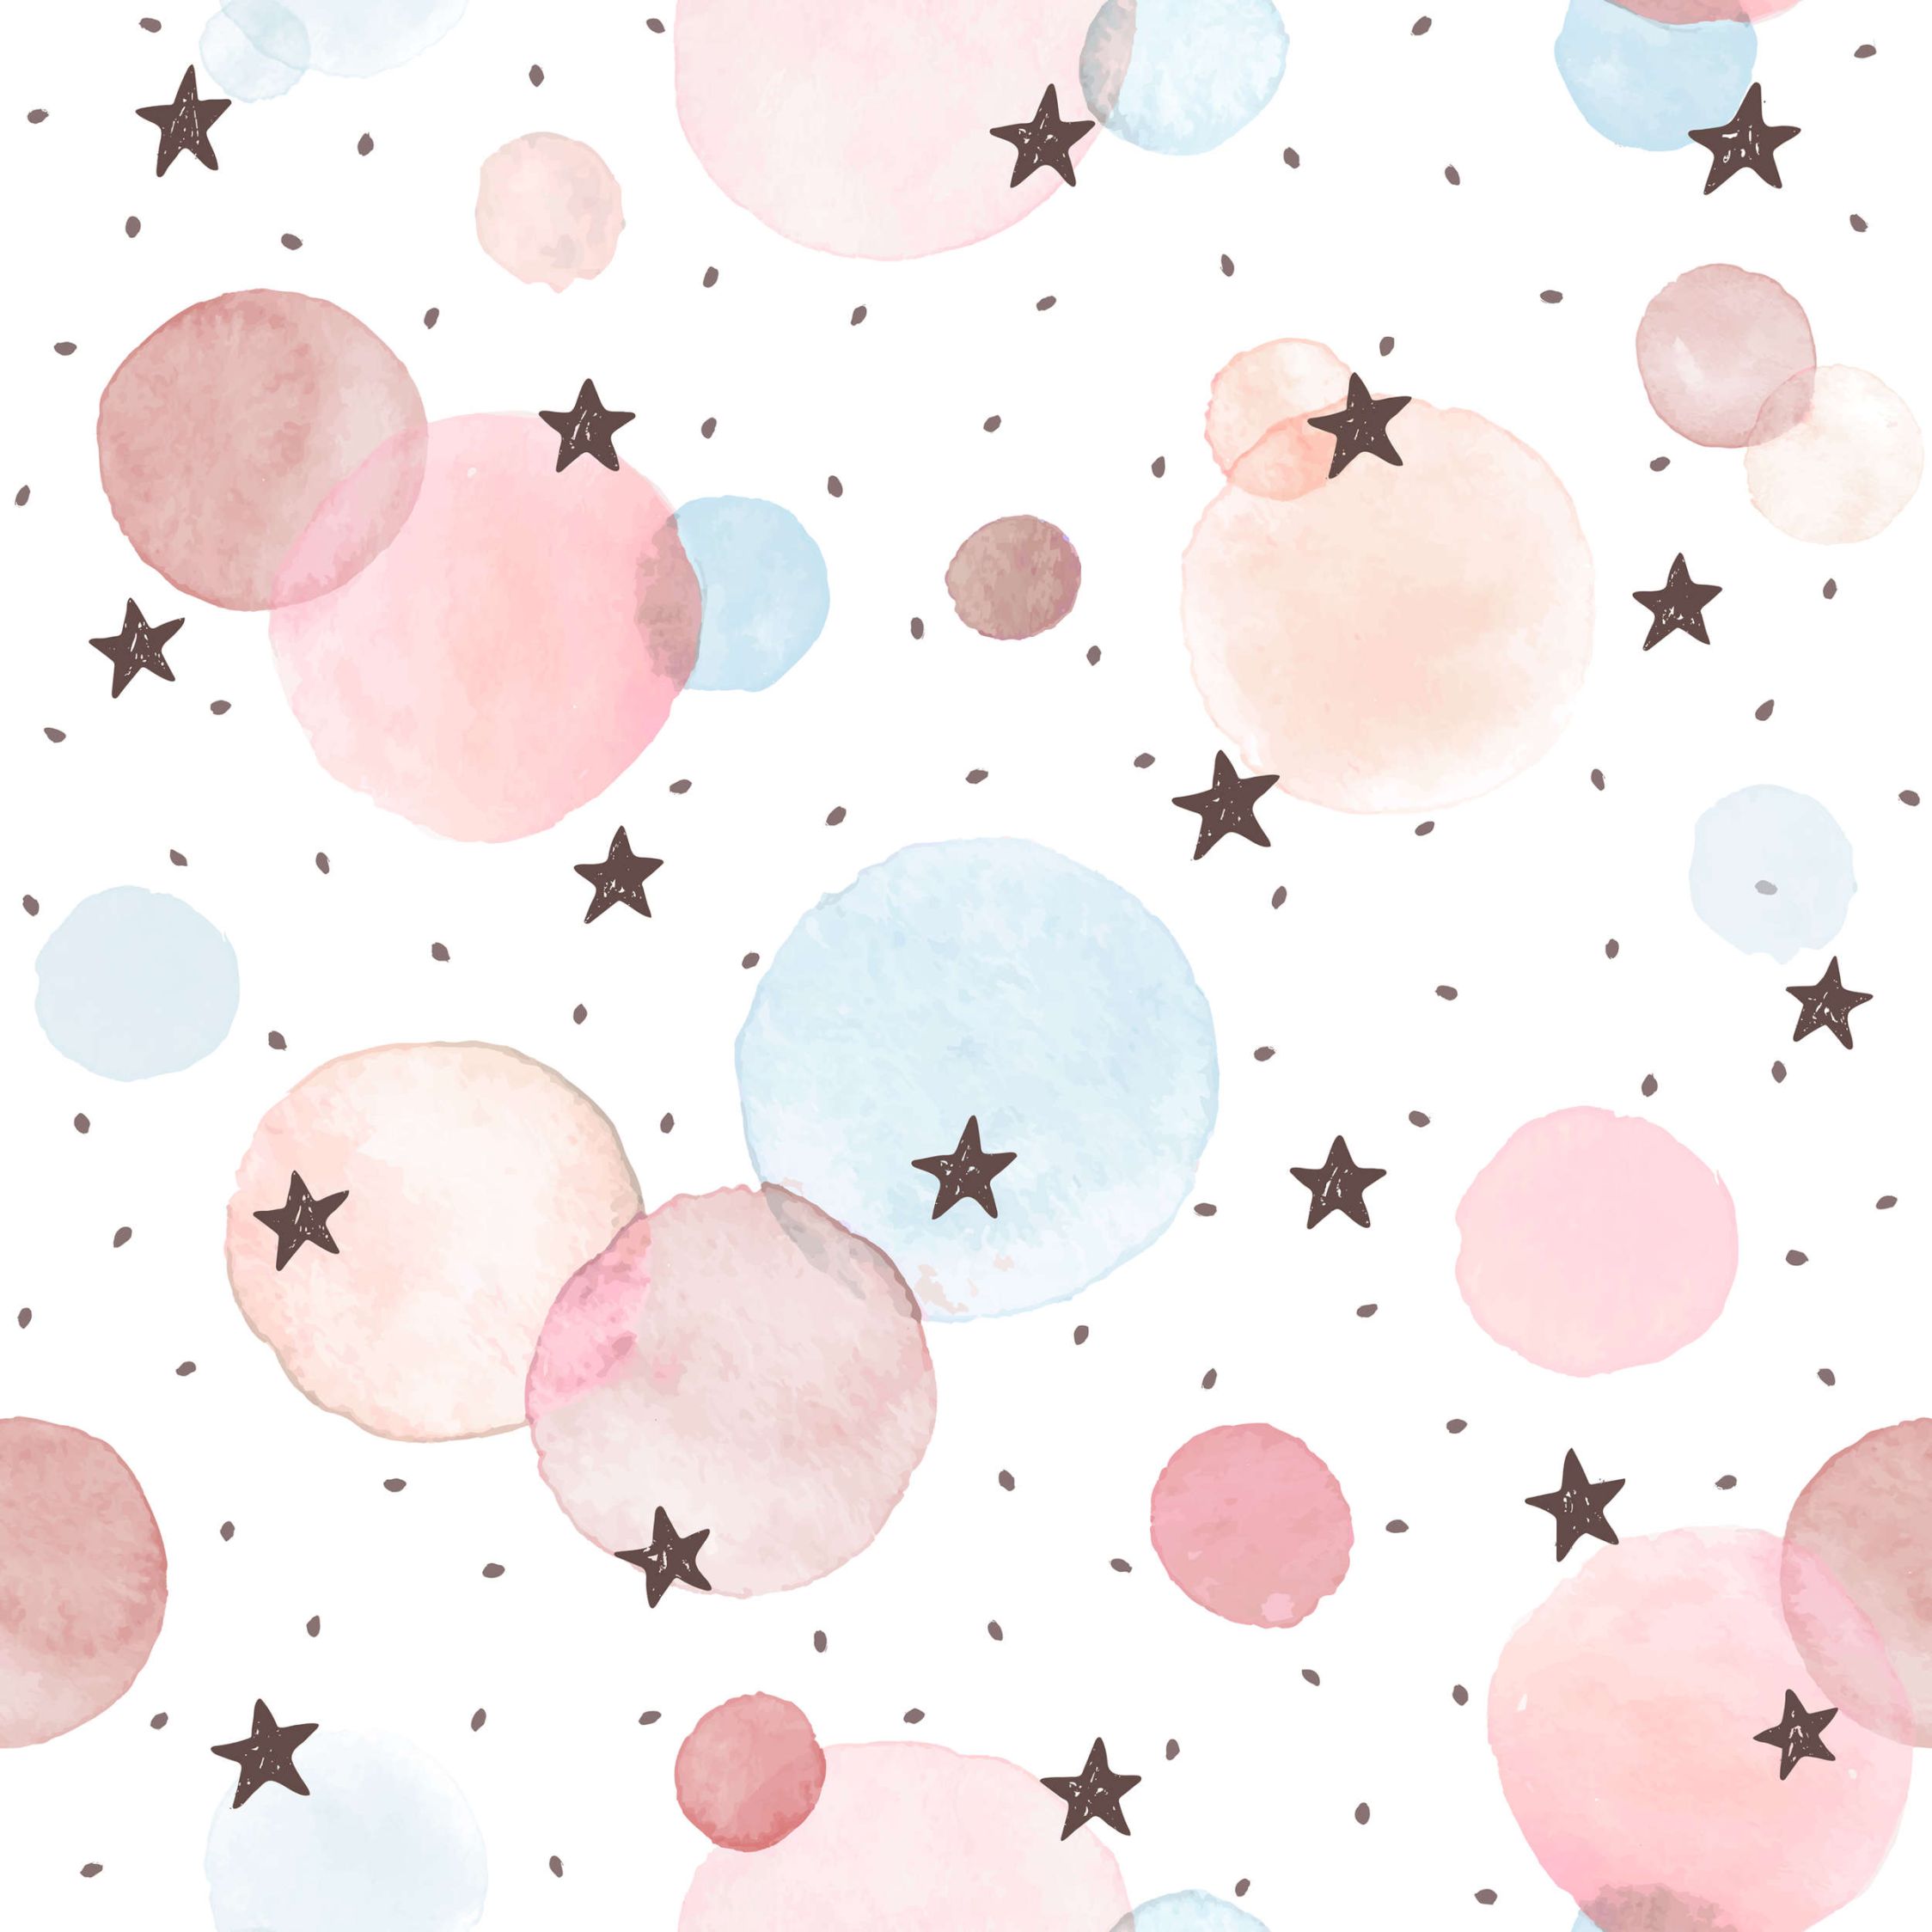             Photo wallpaper for children's room with stars, dots and circles - Smooth & slightly shiny non-woven
        